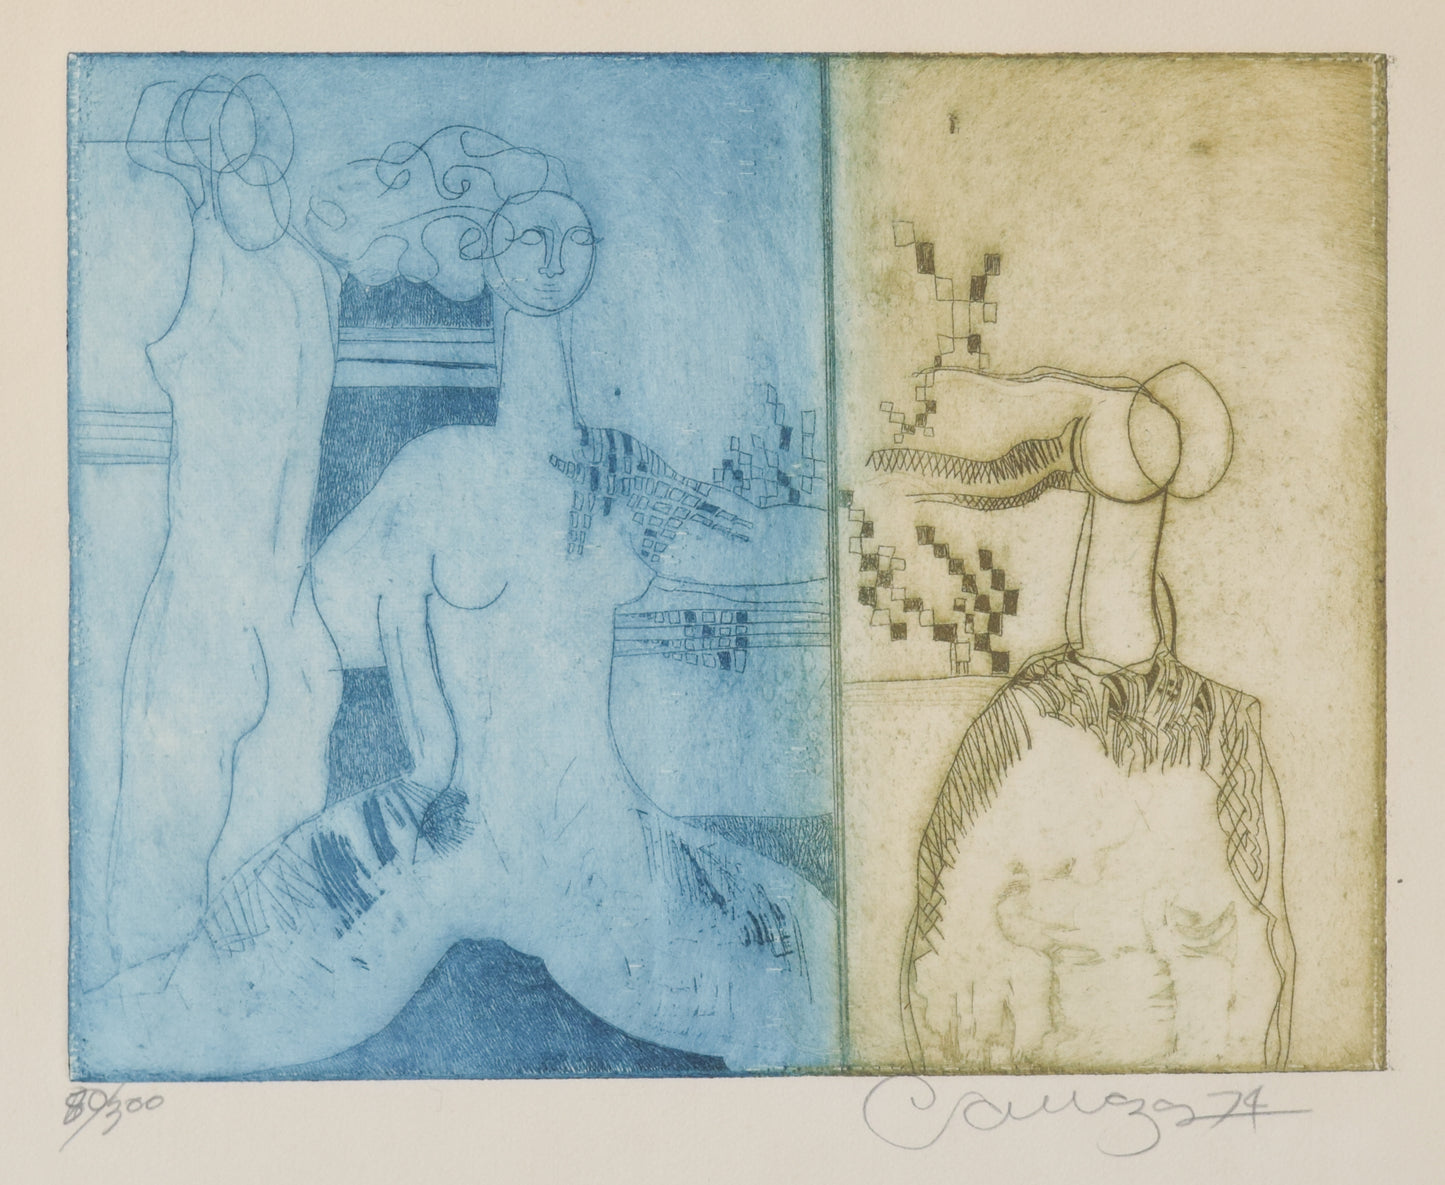 Etching with Nude Figures and Abstract Design